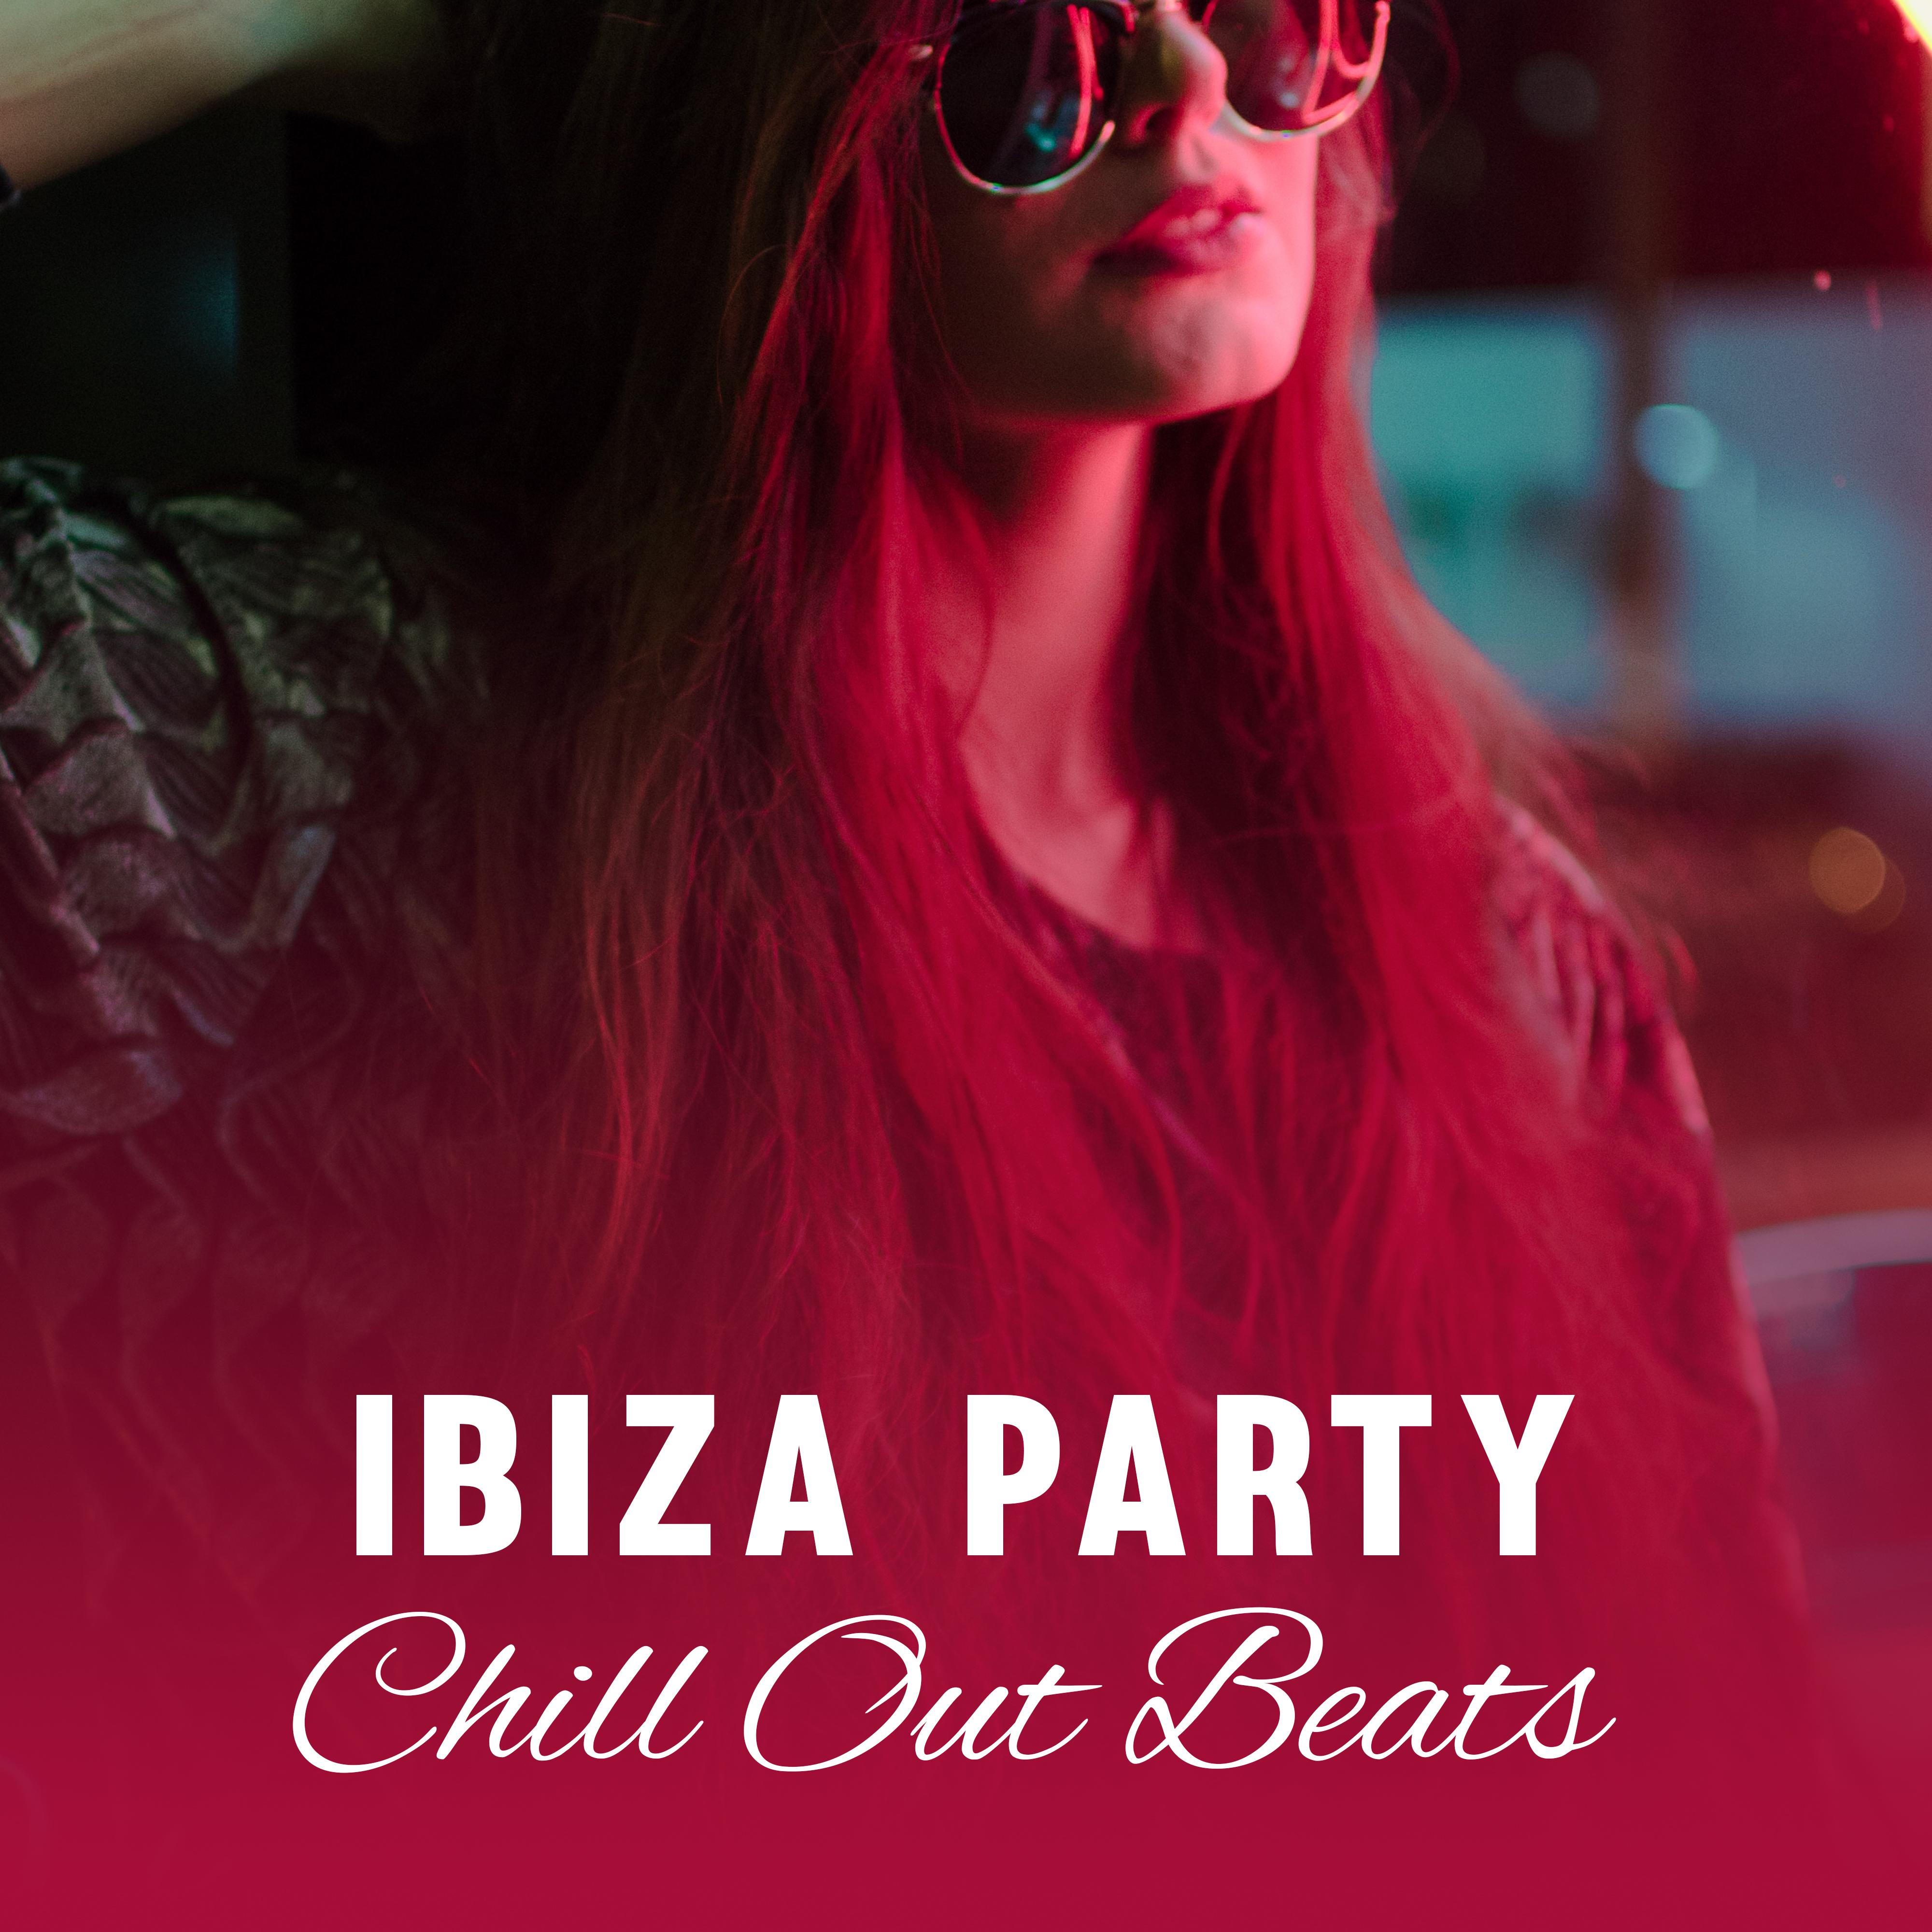 Ibiza Party Chill Out Beats